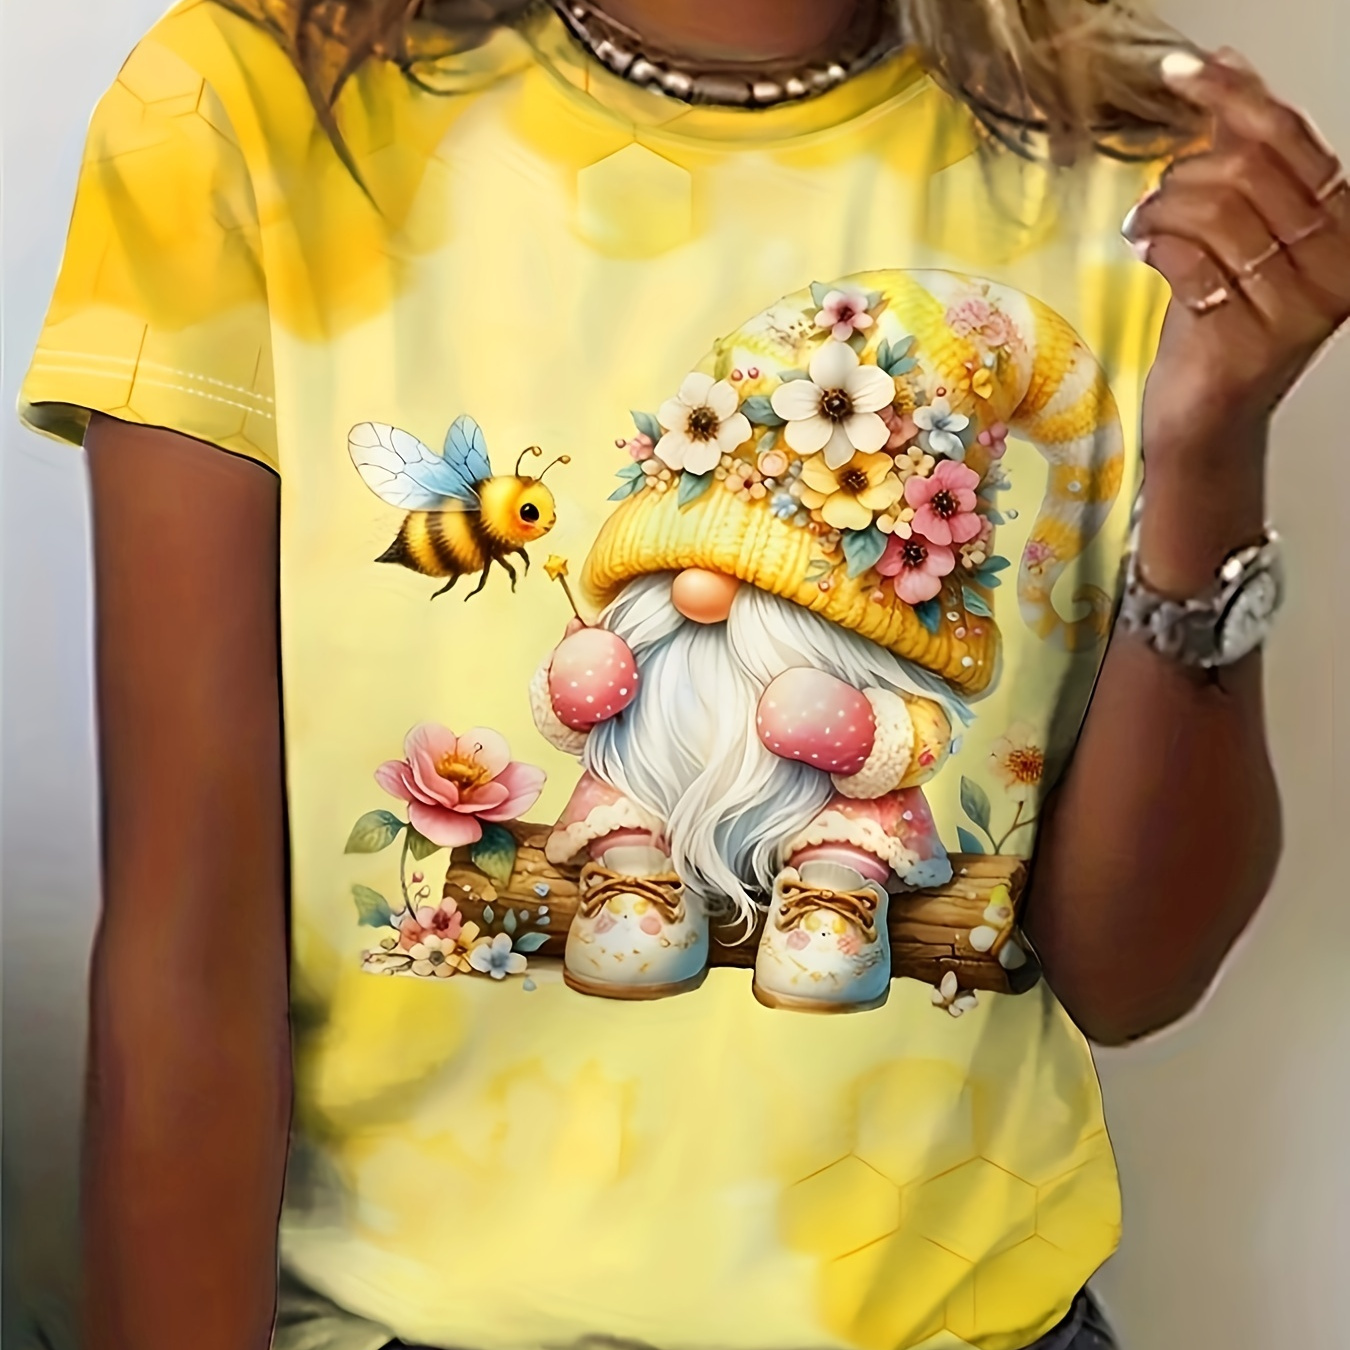 

Bee & Gnomes Print Crew Neck T-shirt, Short Sleeve Casual Tee For Spring & Summer, Women's Clothing